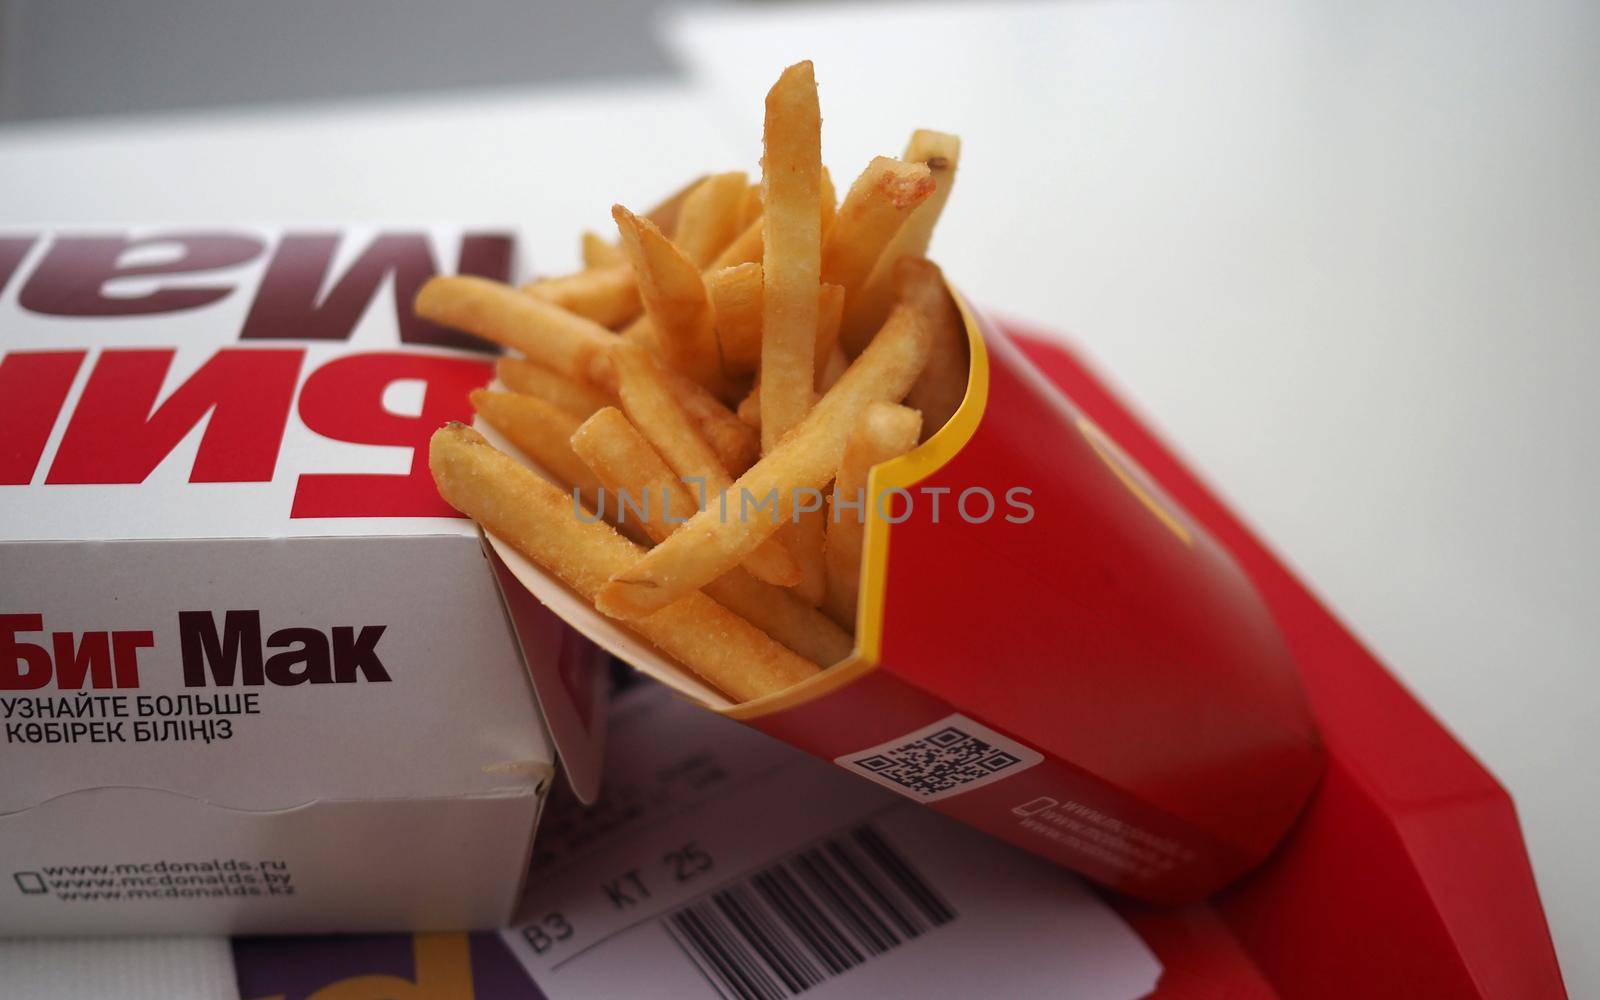 March 10, 2019. Moscow, Russia. Big Mac and fries on a table at McDonald's.